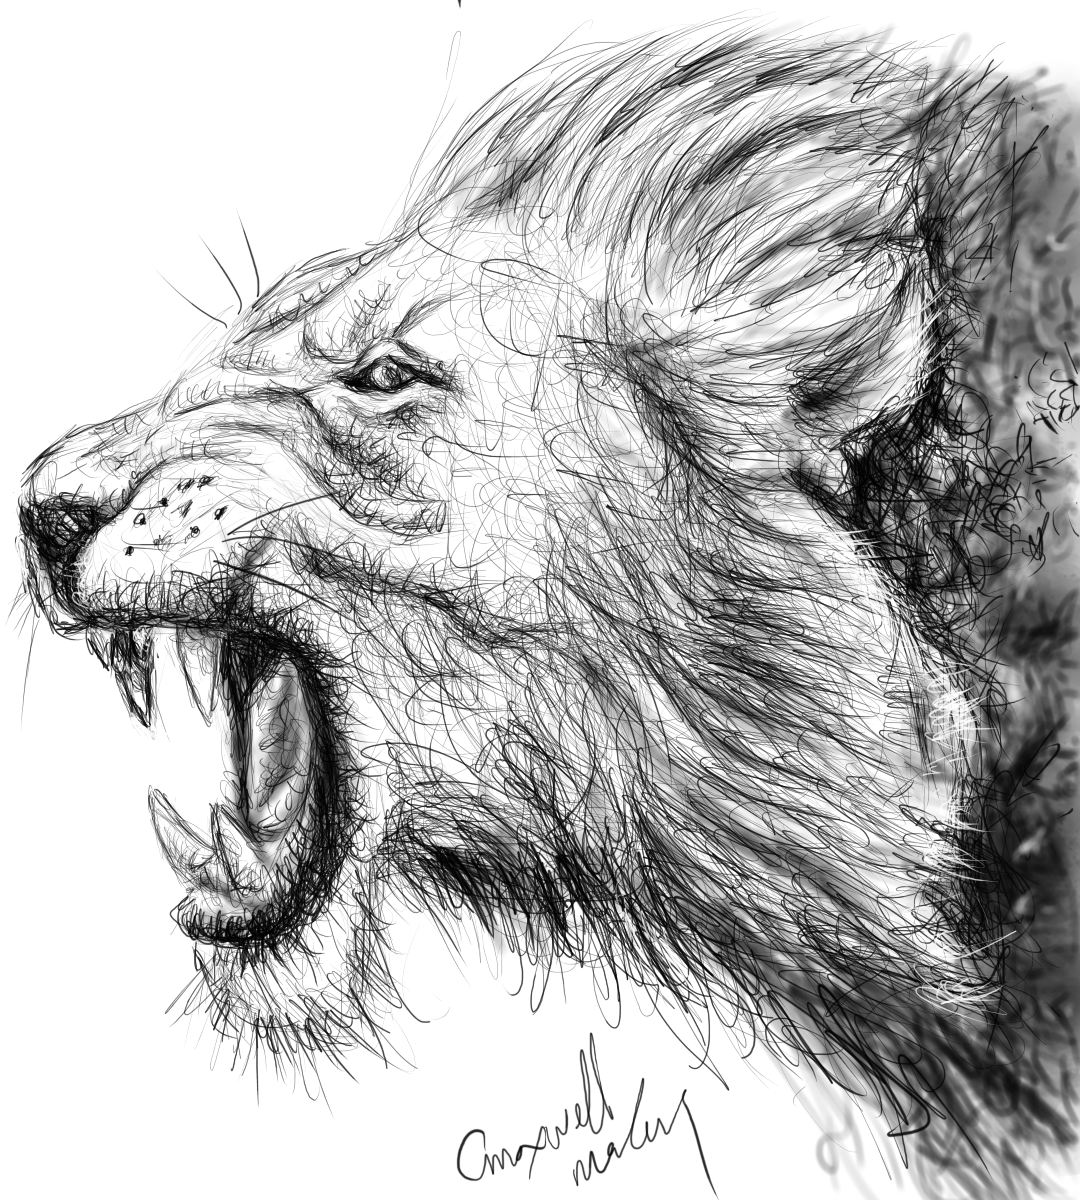 lion roaring front view drawing